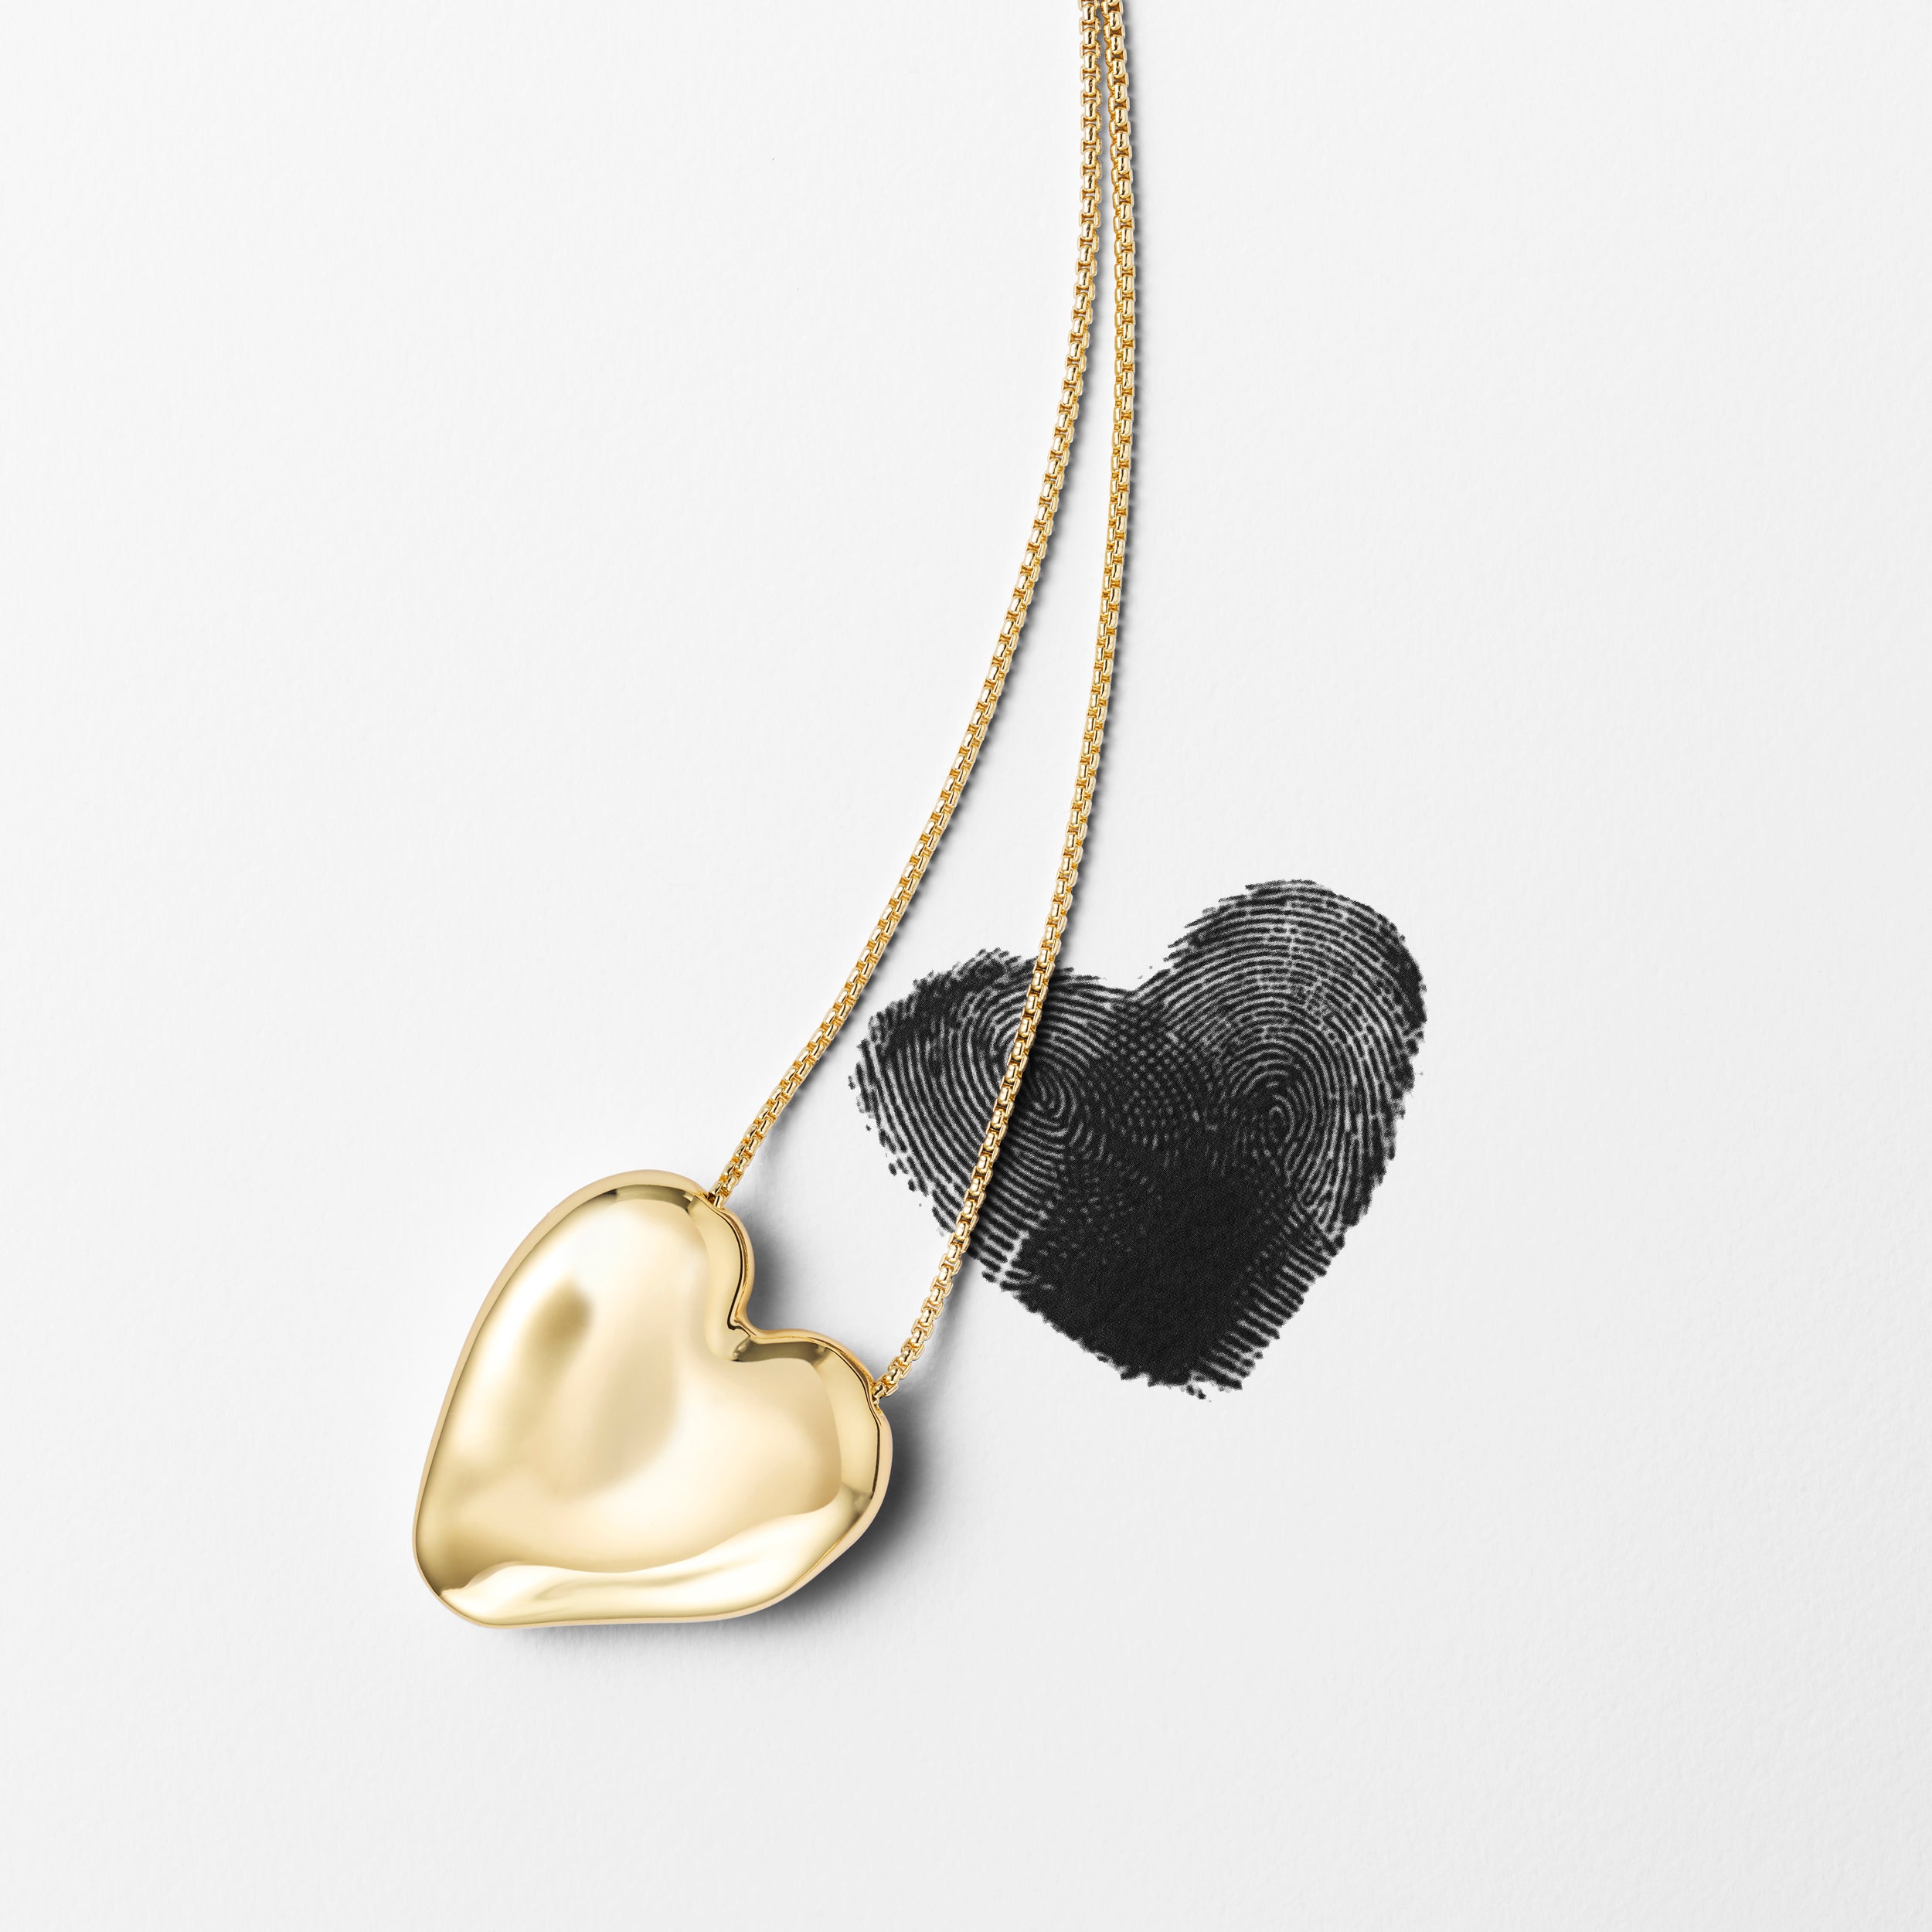 GEMMA LARGE HEART CHAIN NECKLACE - FIVE FOURTY NINE